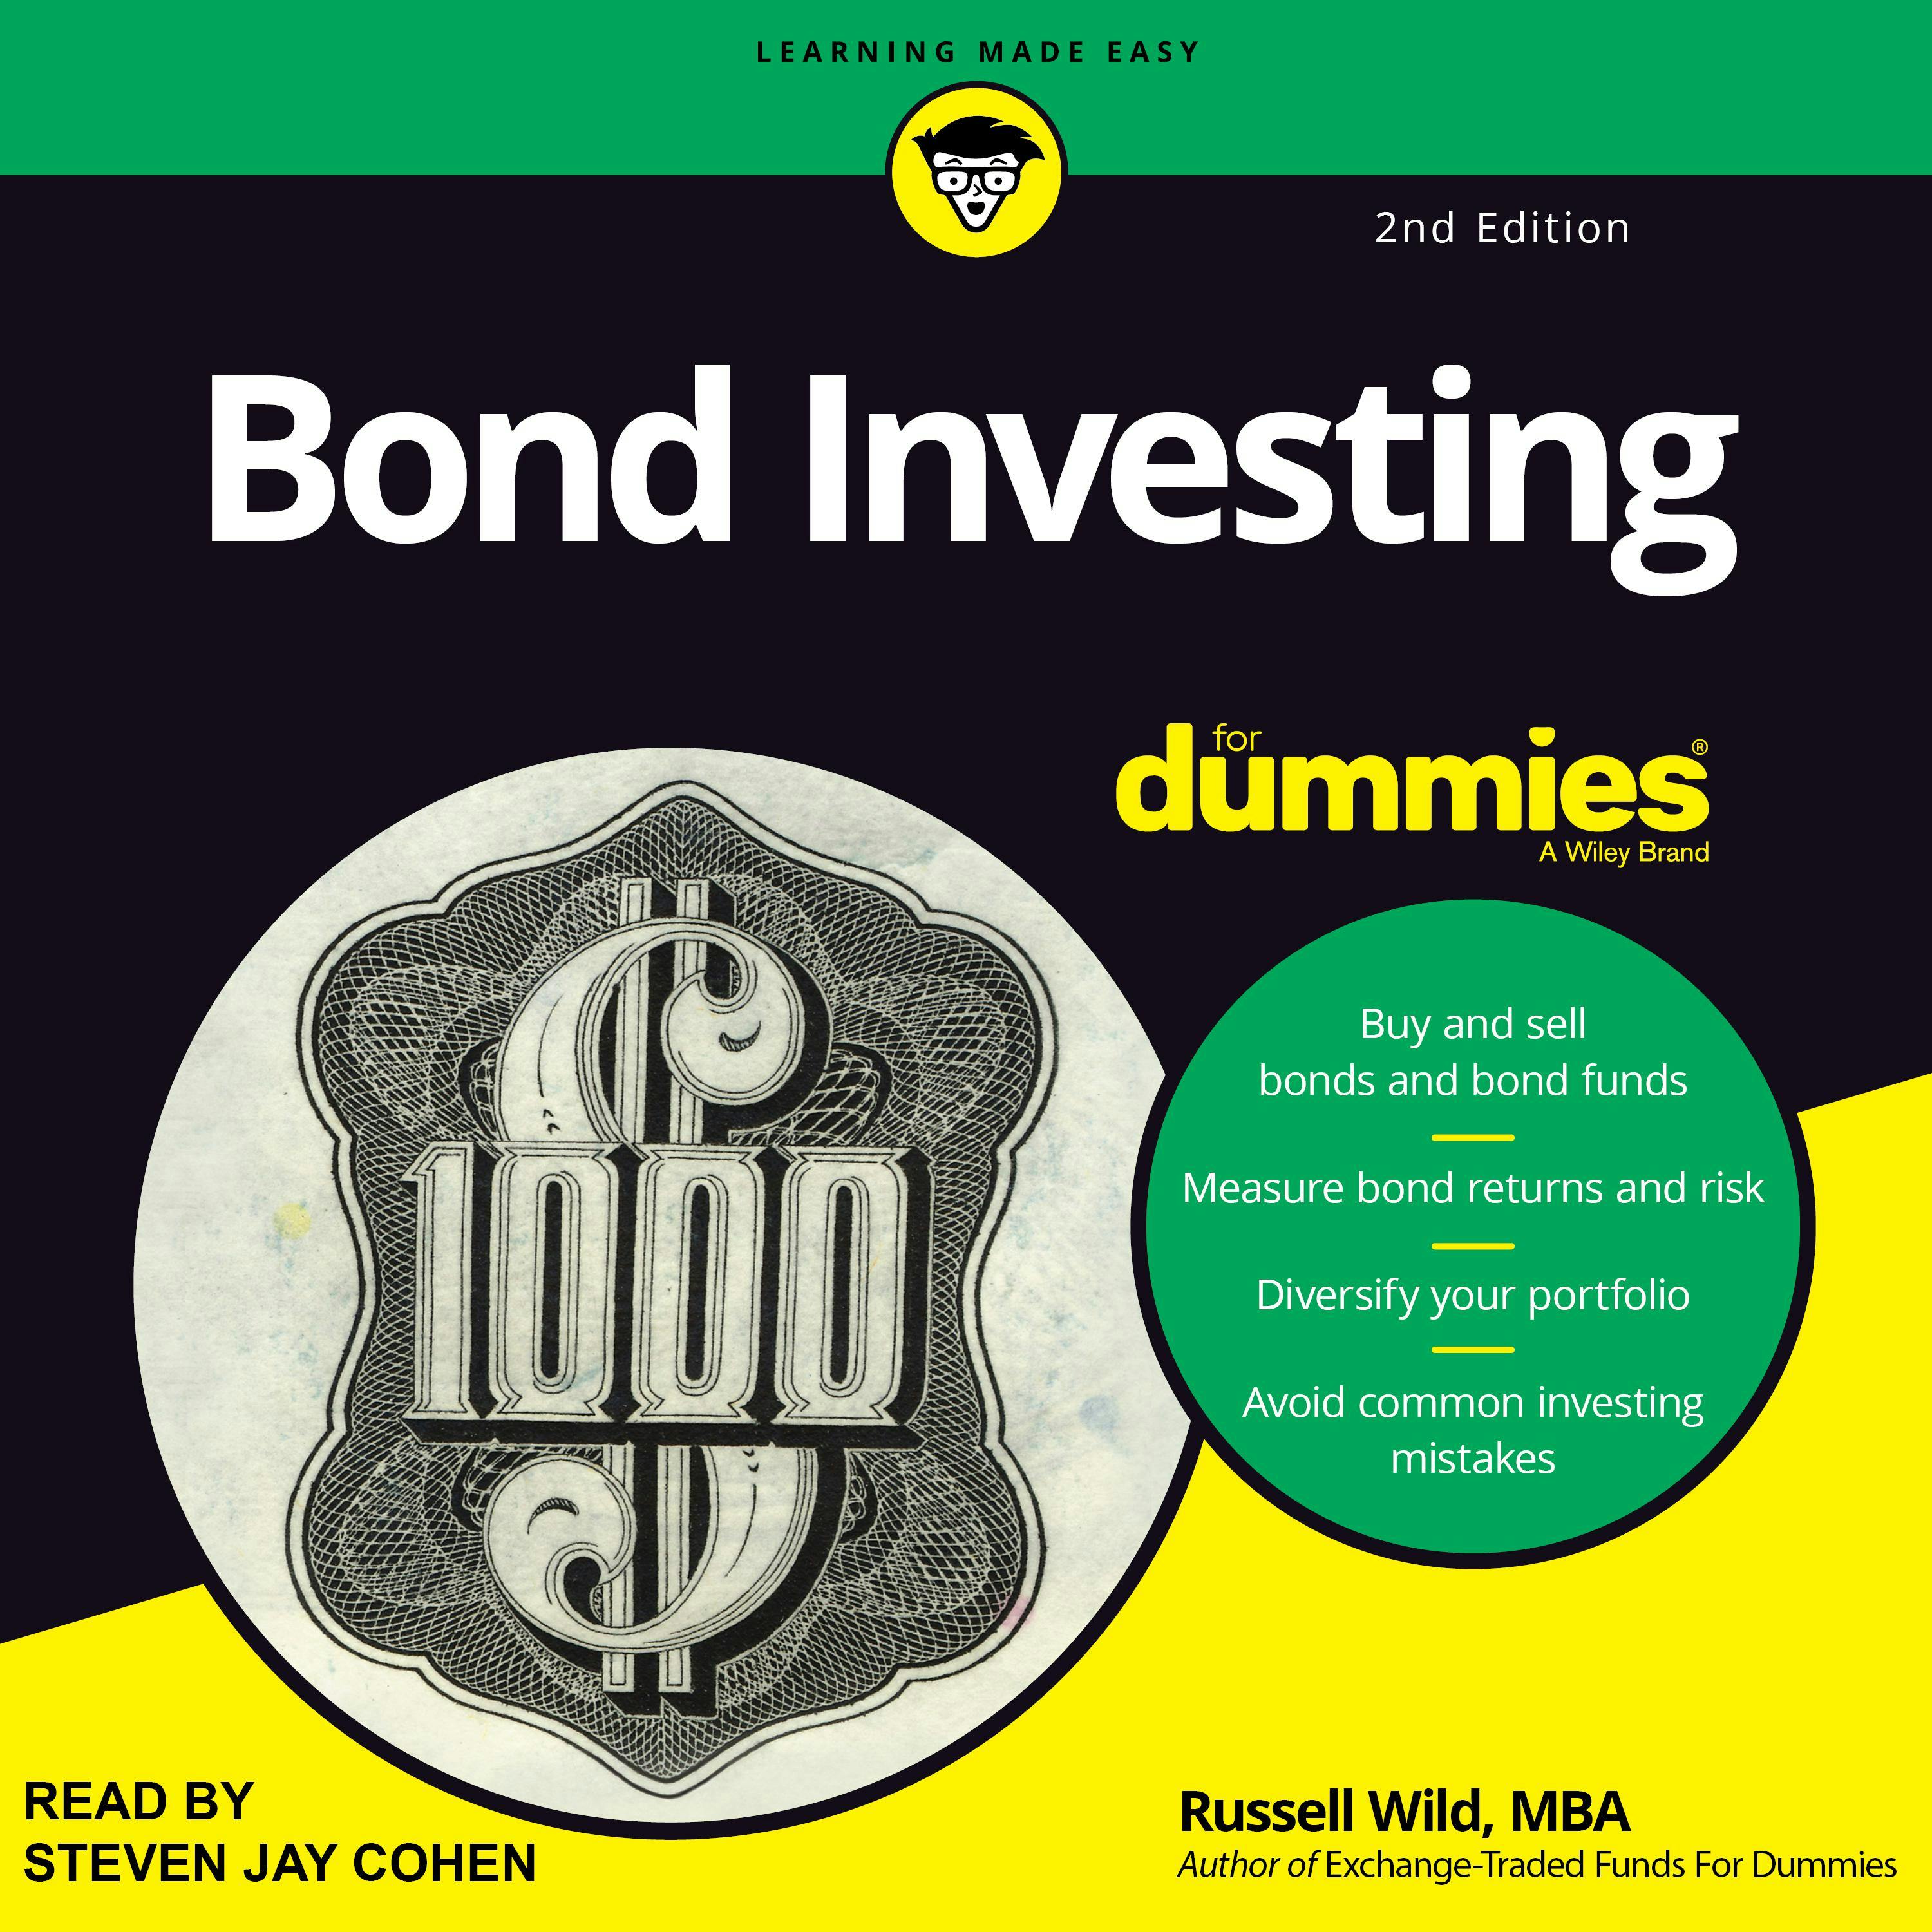 Bond Investing for dummies: 2nd Edition - MBA